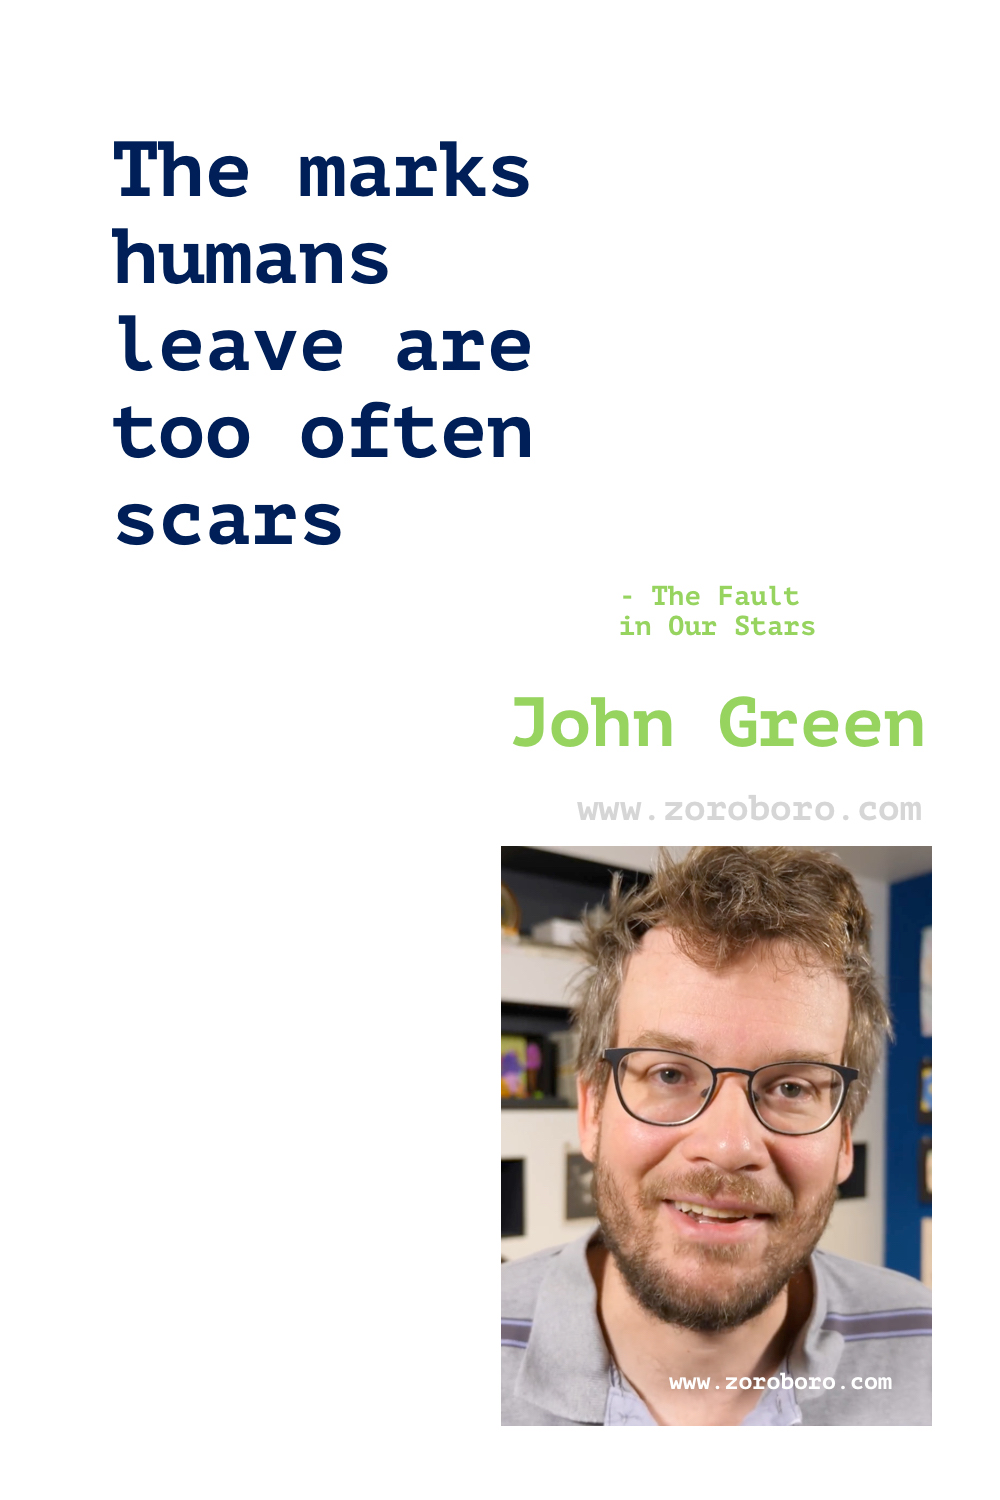 John Green Quotes, John Green Books Quotes, John Green The Fault in Our Stars, John Green Looking for Alaska, John Green Paper Towns & John Green Turtles All the Way Down Quotes, John Green Quotes.